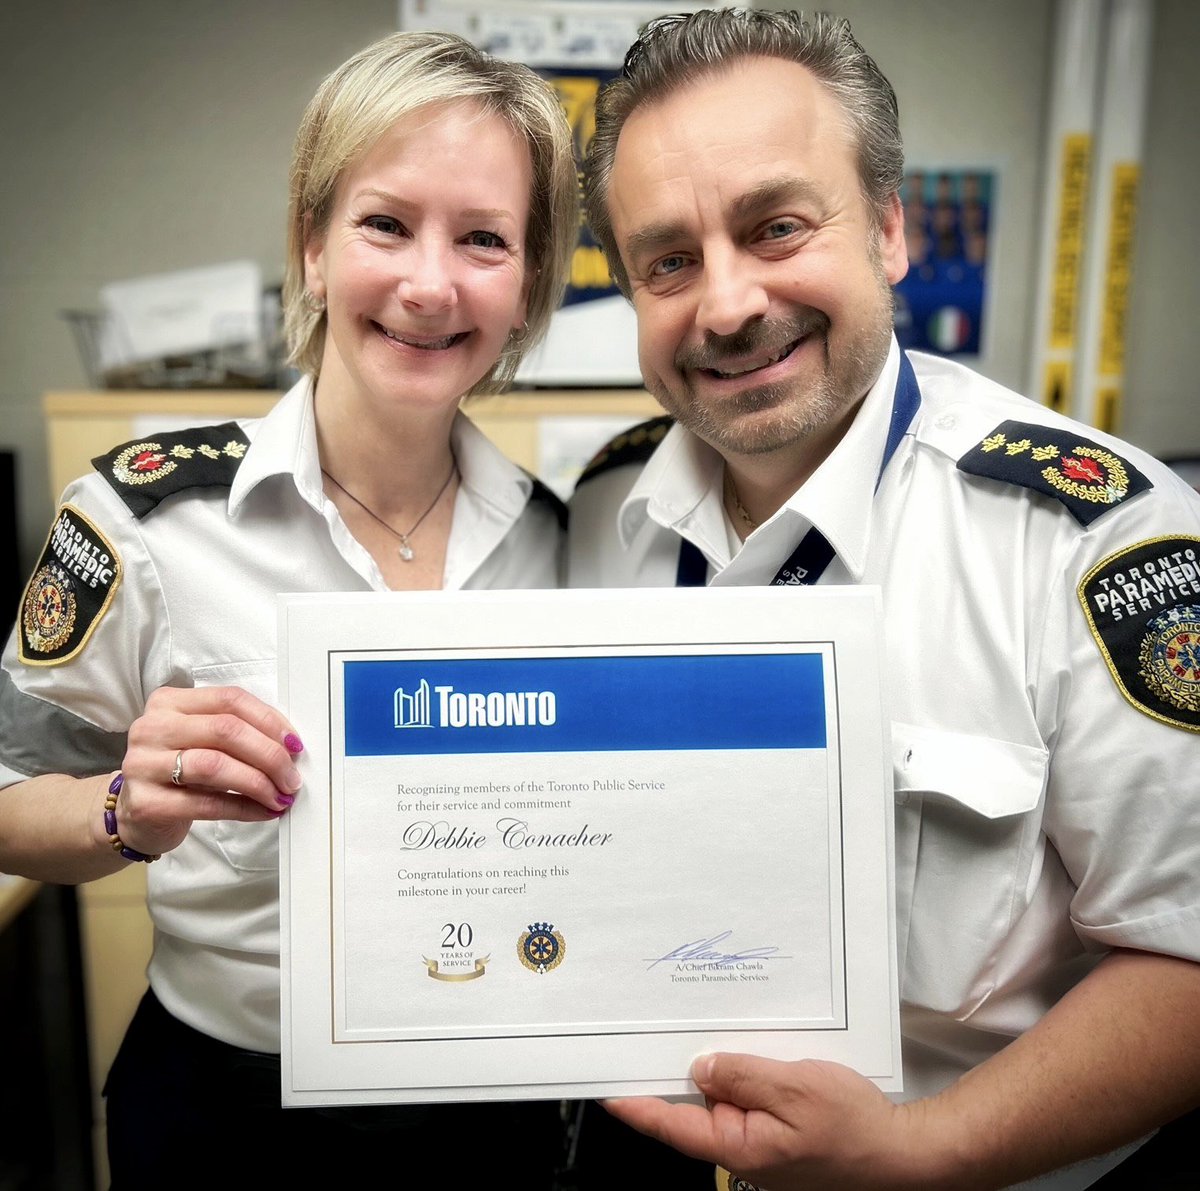 Logistics Superintendent Deb recently received her certificate recognizing 20 years of service. #Congratulations on this milestone and thank you for your unwavering commitment to @cityoftoronto!